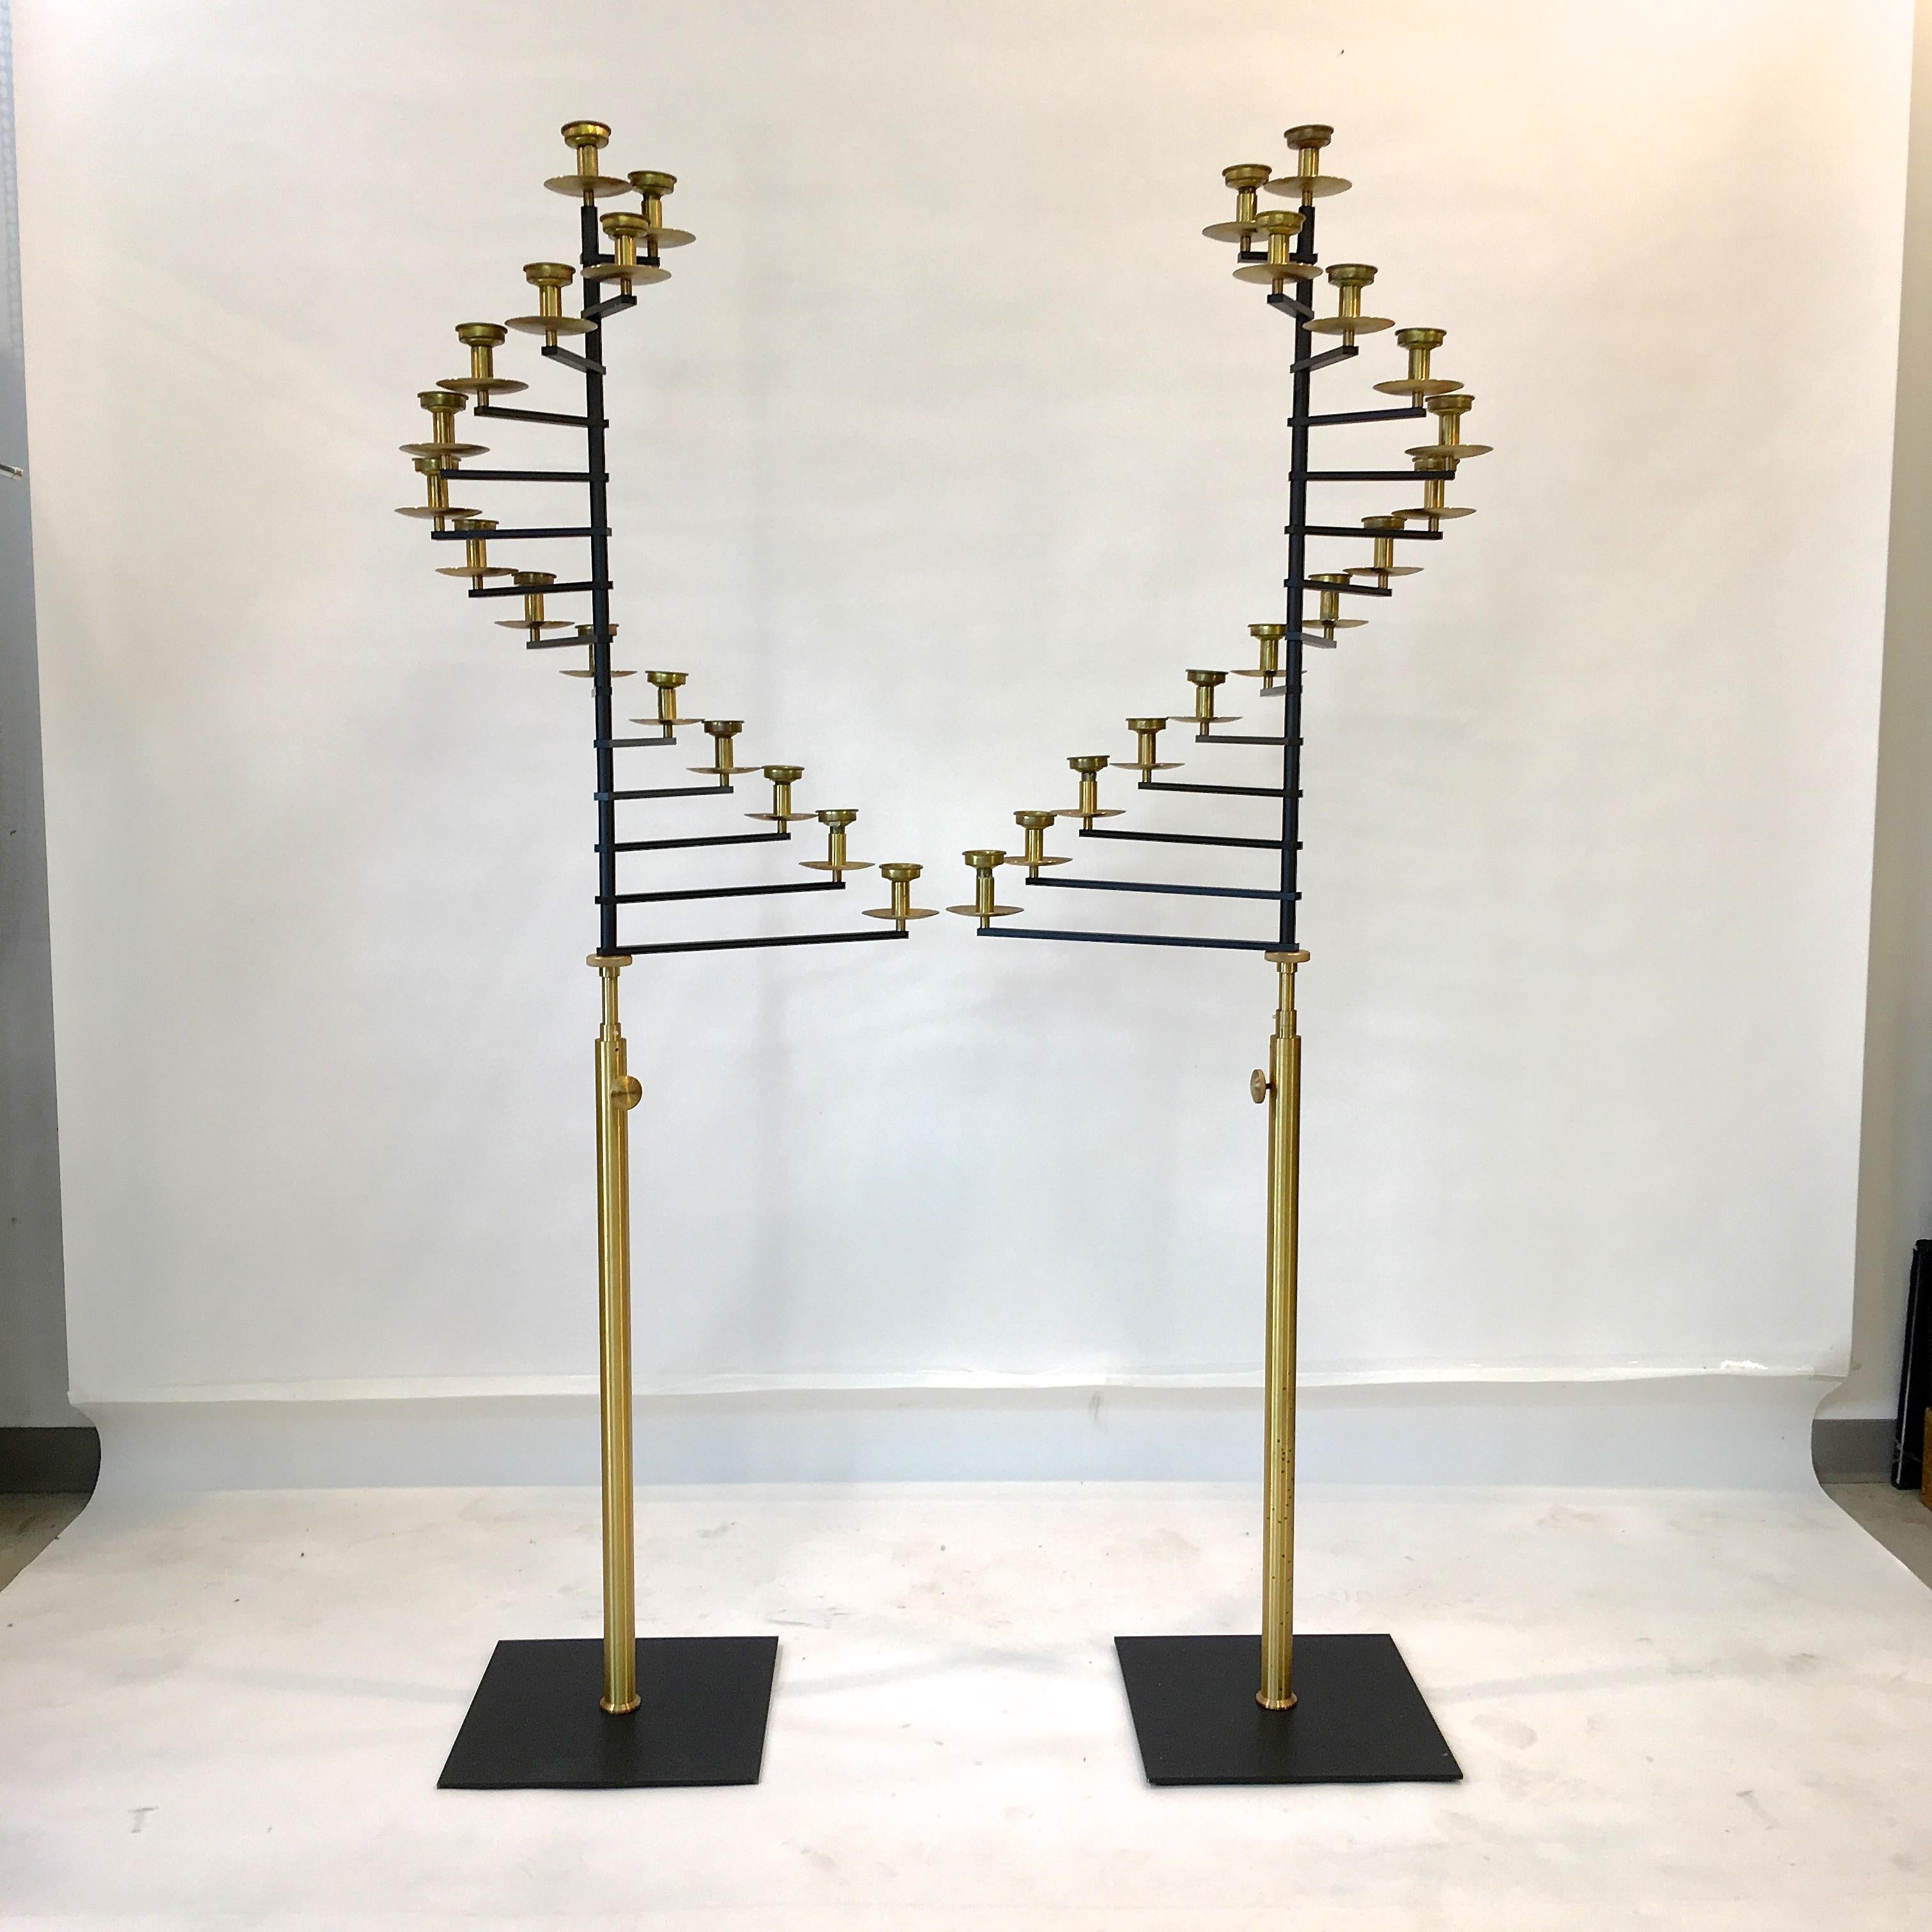 Pair of 6 foot 3 inch tall 15-light brass spiral fan candelabra, circa 1960, from a deconsecrated Rhode Island church.

Quite well constructed with solid brass adjustable stem, solid brass knurled knobs, 14 flat black enameled brass arms of